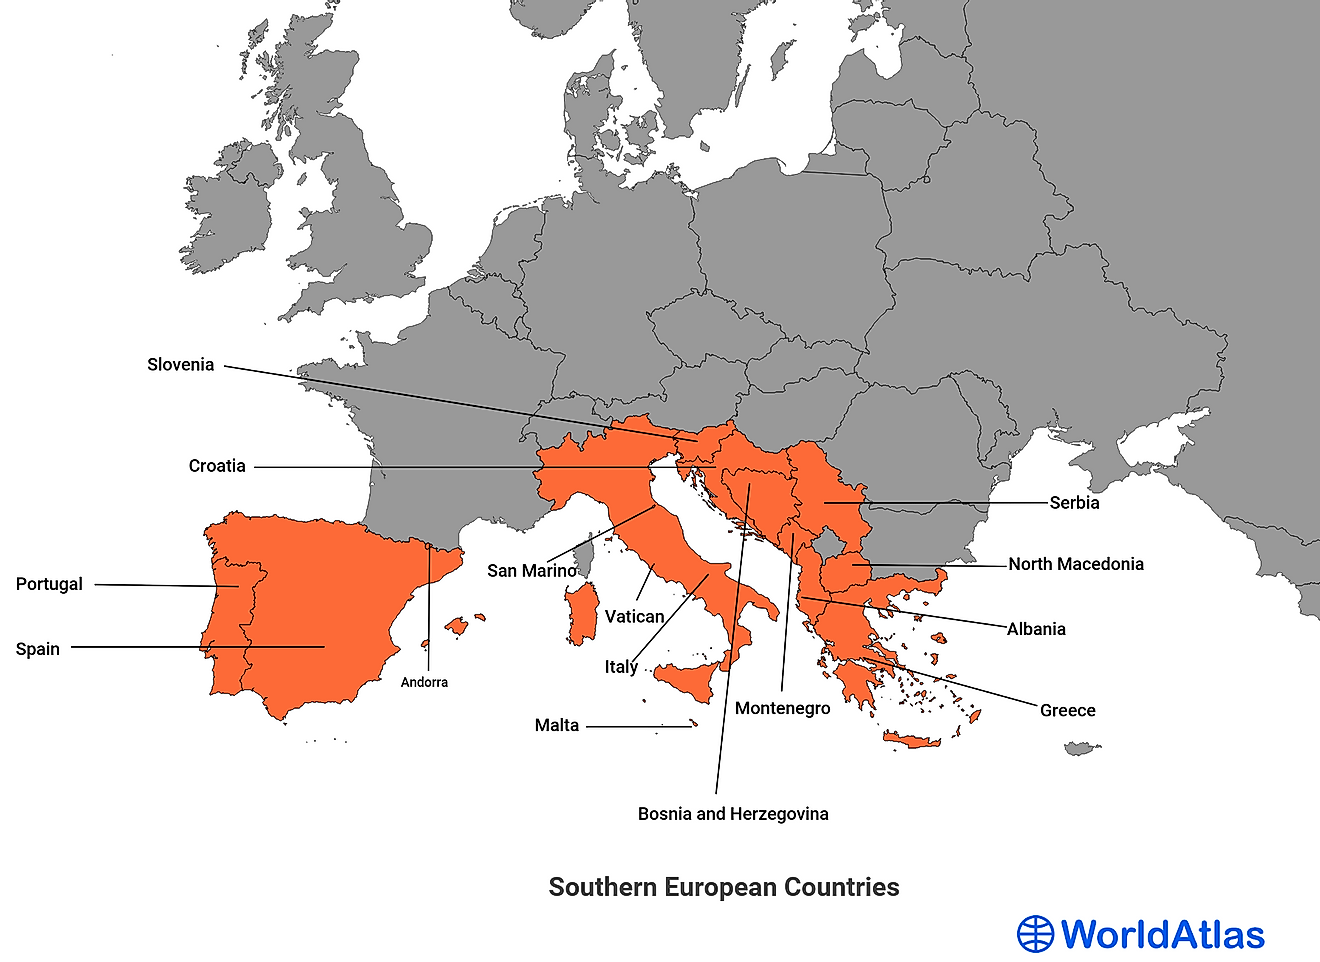 Fifteen countries of Southern Europe.